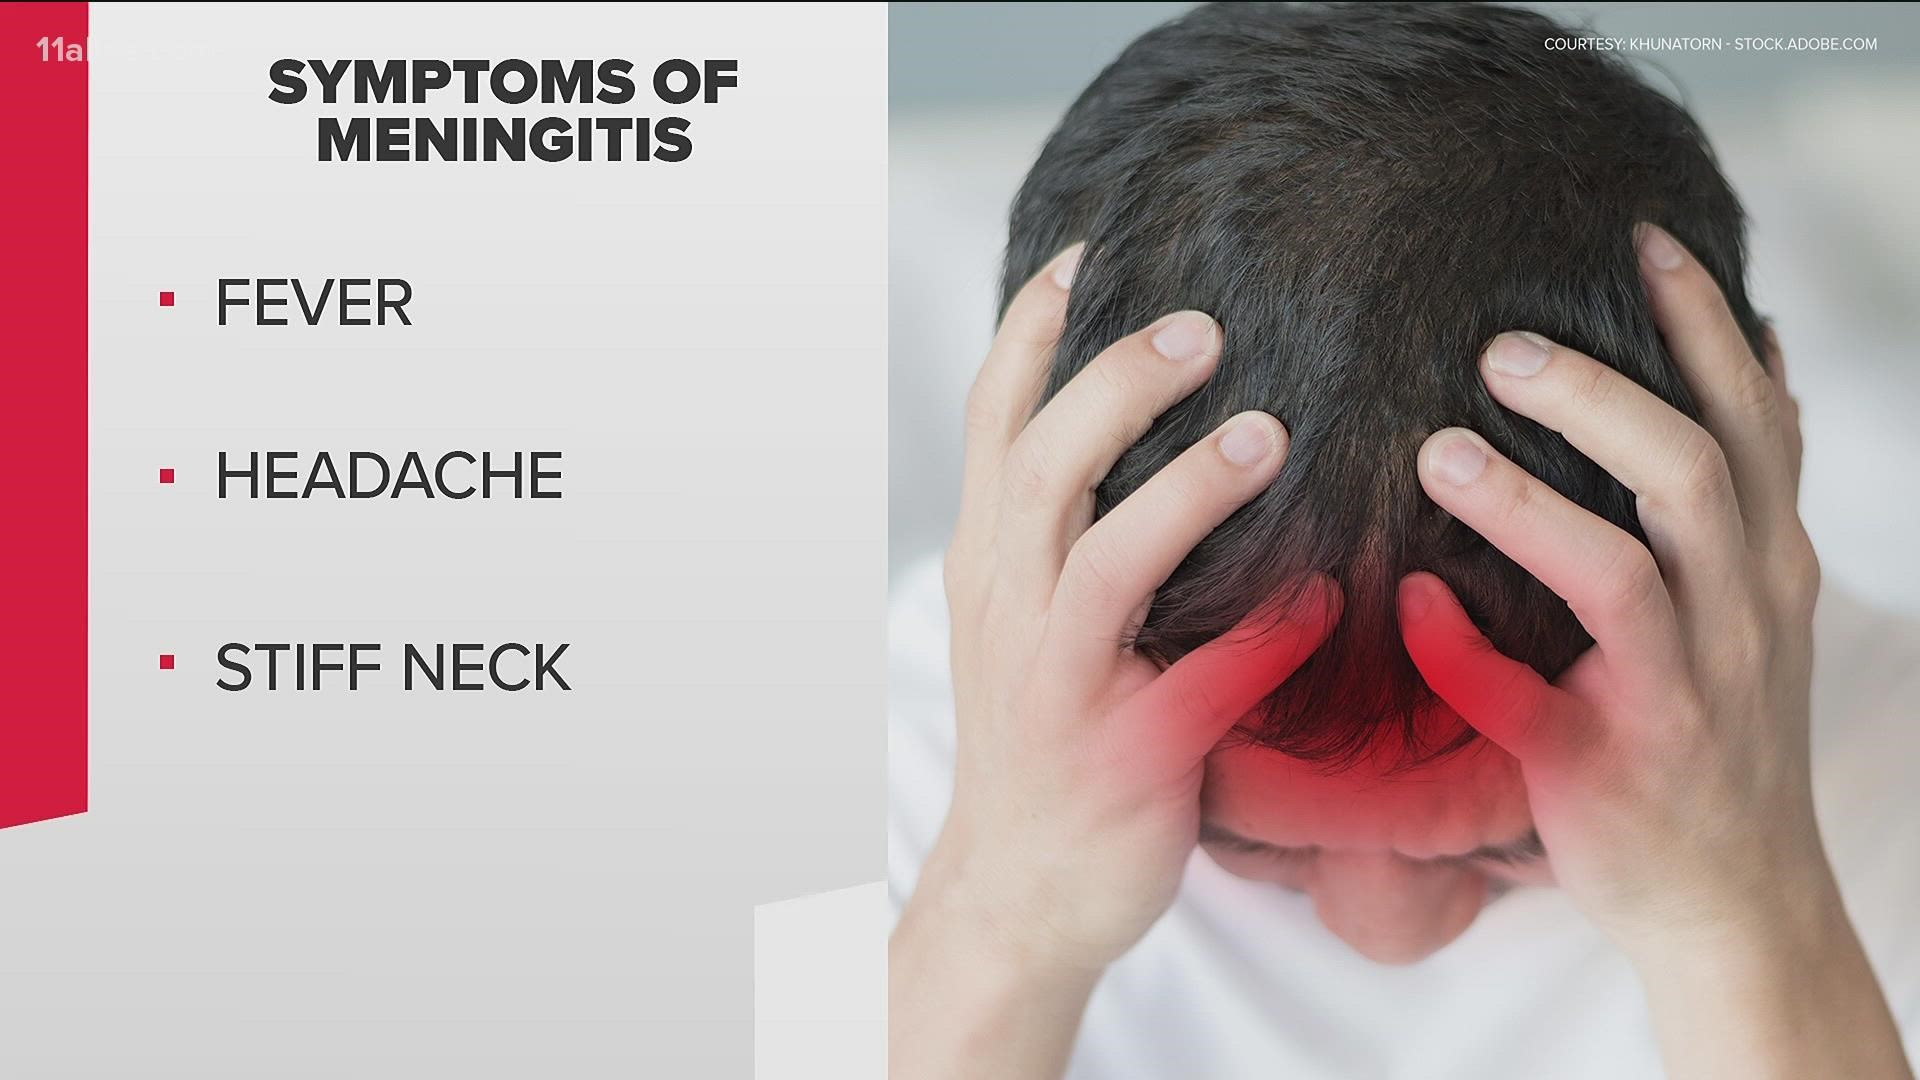 The disease can cause infections in the lining of your brain or spinal cord, and cause swelling.